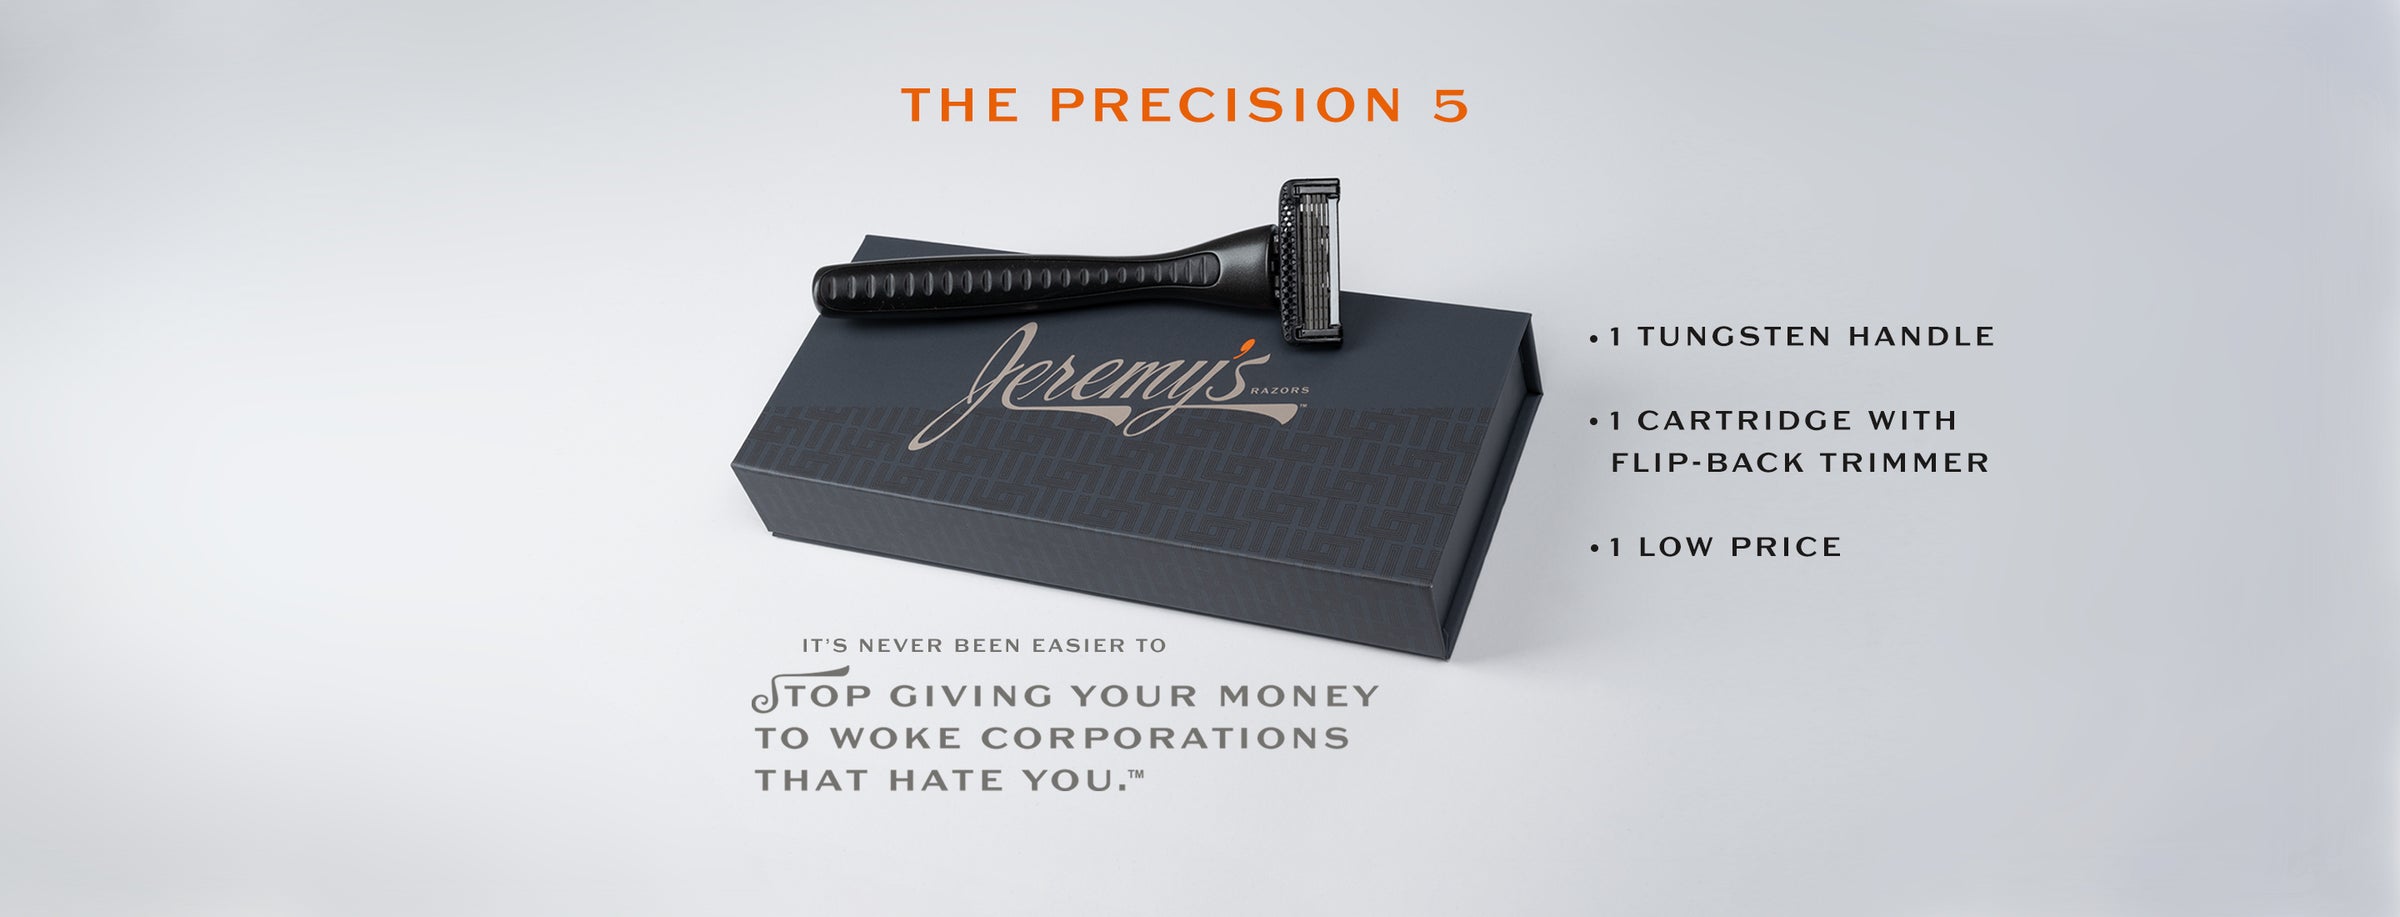 The Precision 5 - 1 Tungsten Handle, 1 Cartridge with Flip-Back Trimmer, 1 Low Price. It's never been easier to stop giving your money to woke corporations that hate you.